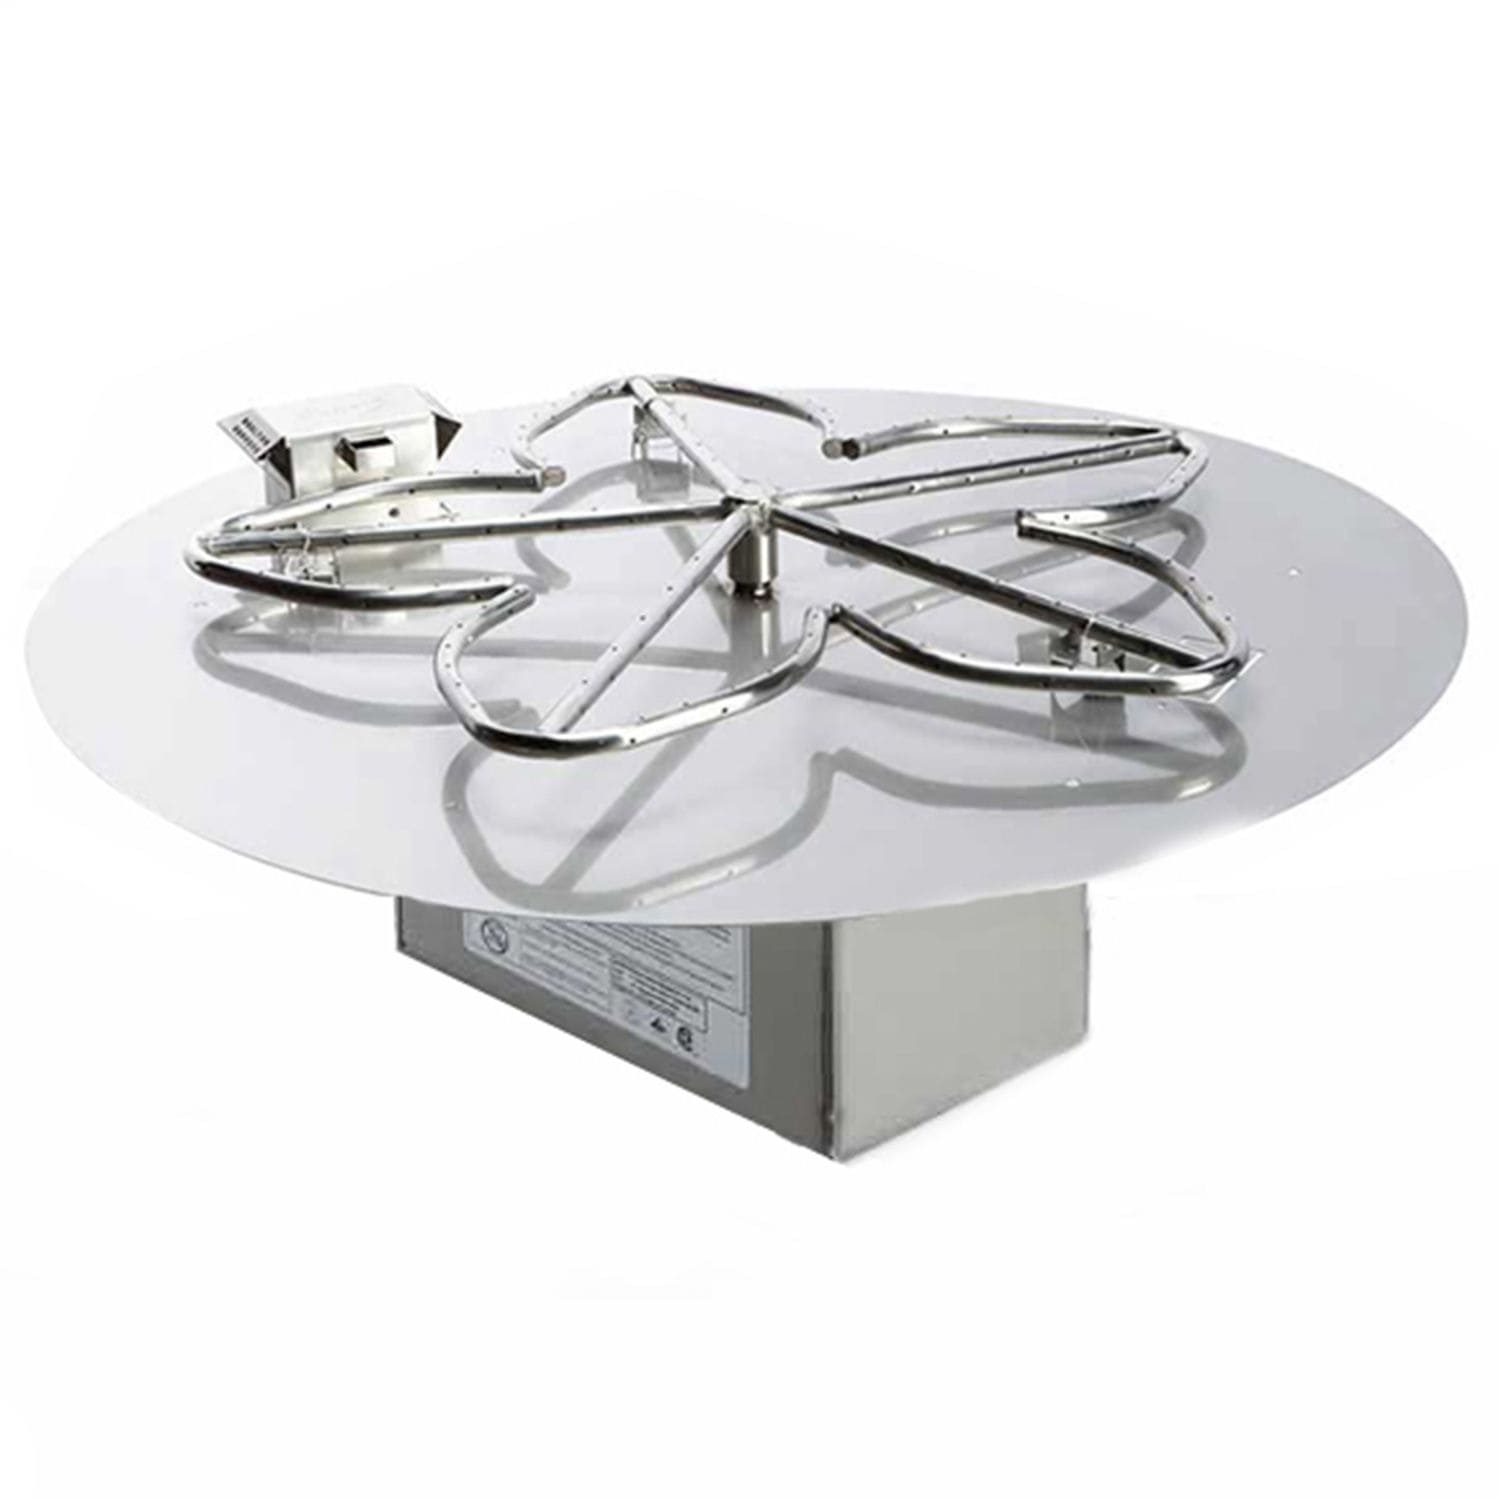 HPC Fire Standard Penta Burner with Round Flat Pan in White Background